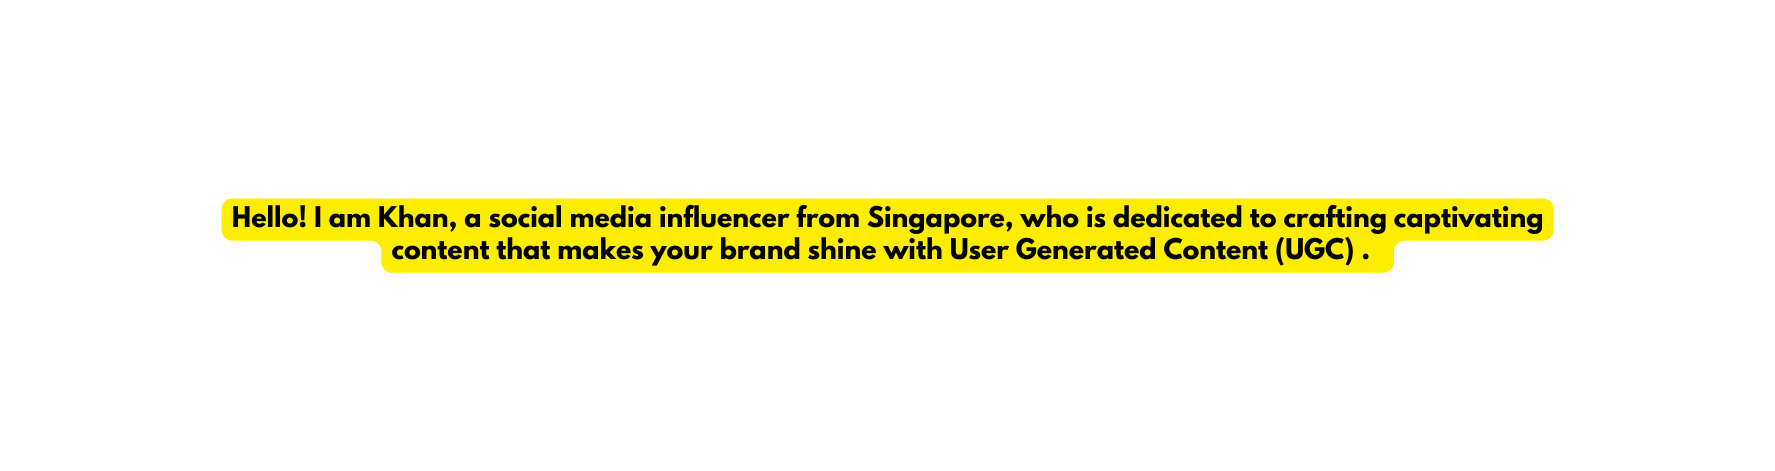 Hello I am Khan a social media influencer from Singapore who is dedicated to crafting captivating content that makes your brand shine with User Generated Content UGC